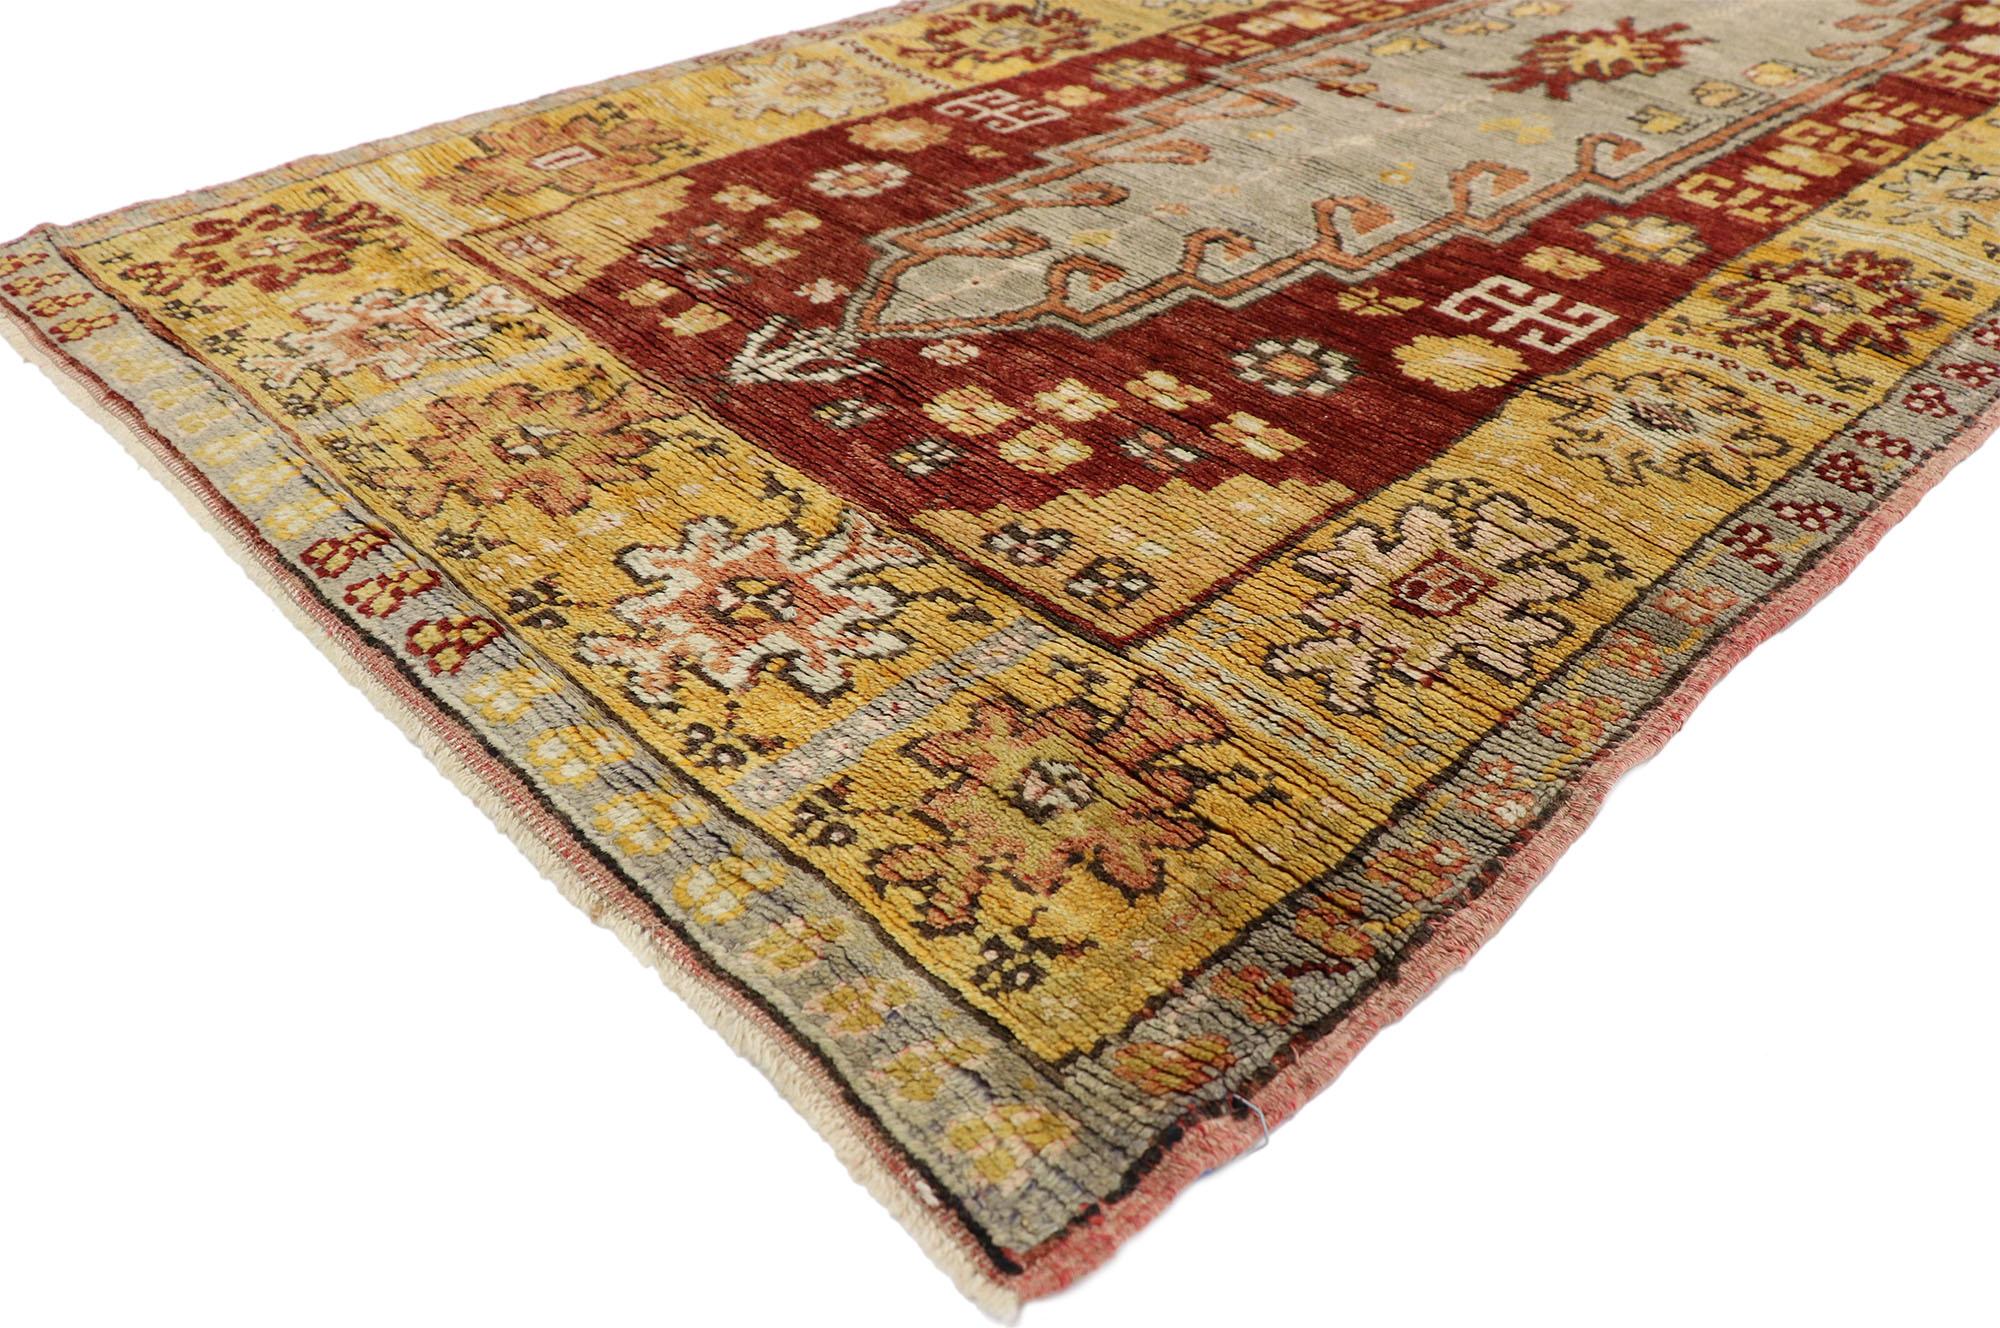 50651 Vintage Turkish Oushak Runner, 03'06 x 11'00.
This hand-knotted wool vintage Turkish Oushak runner features two medallions and a classic palette of deep red, subdued grey, cream and golden saffron tones whose pleasing qualities are enhanced by